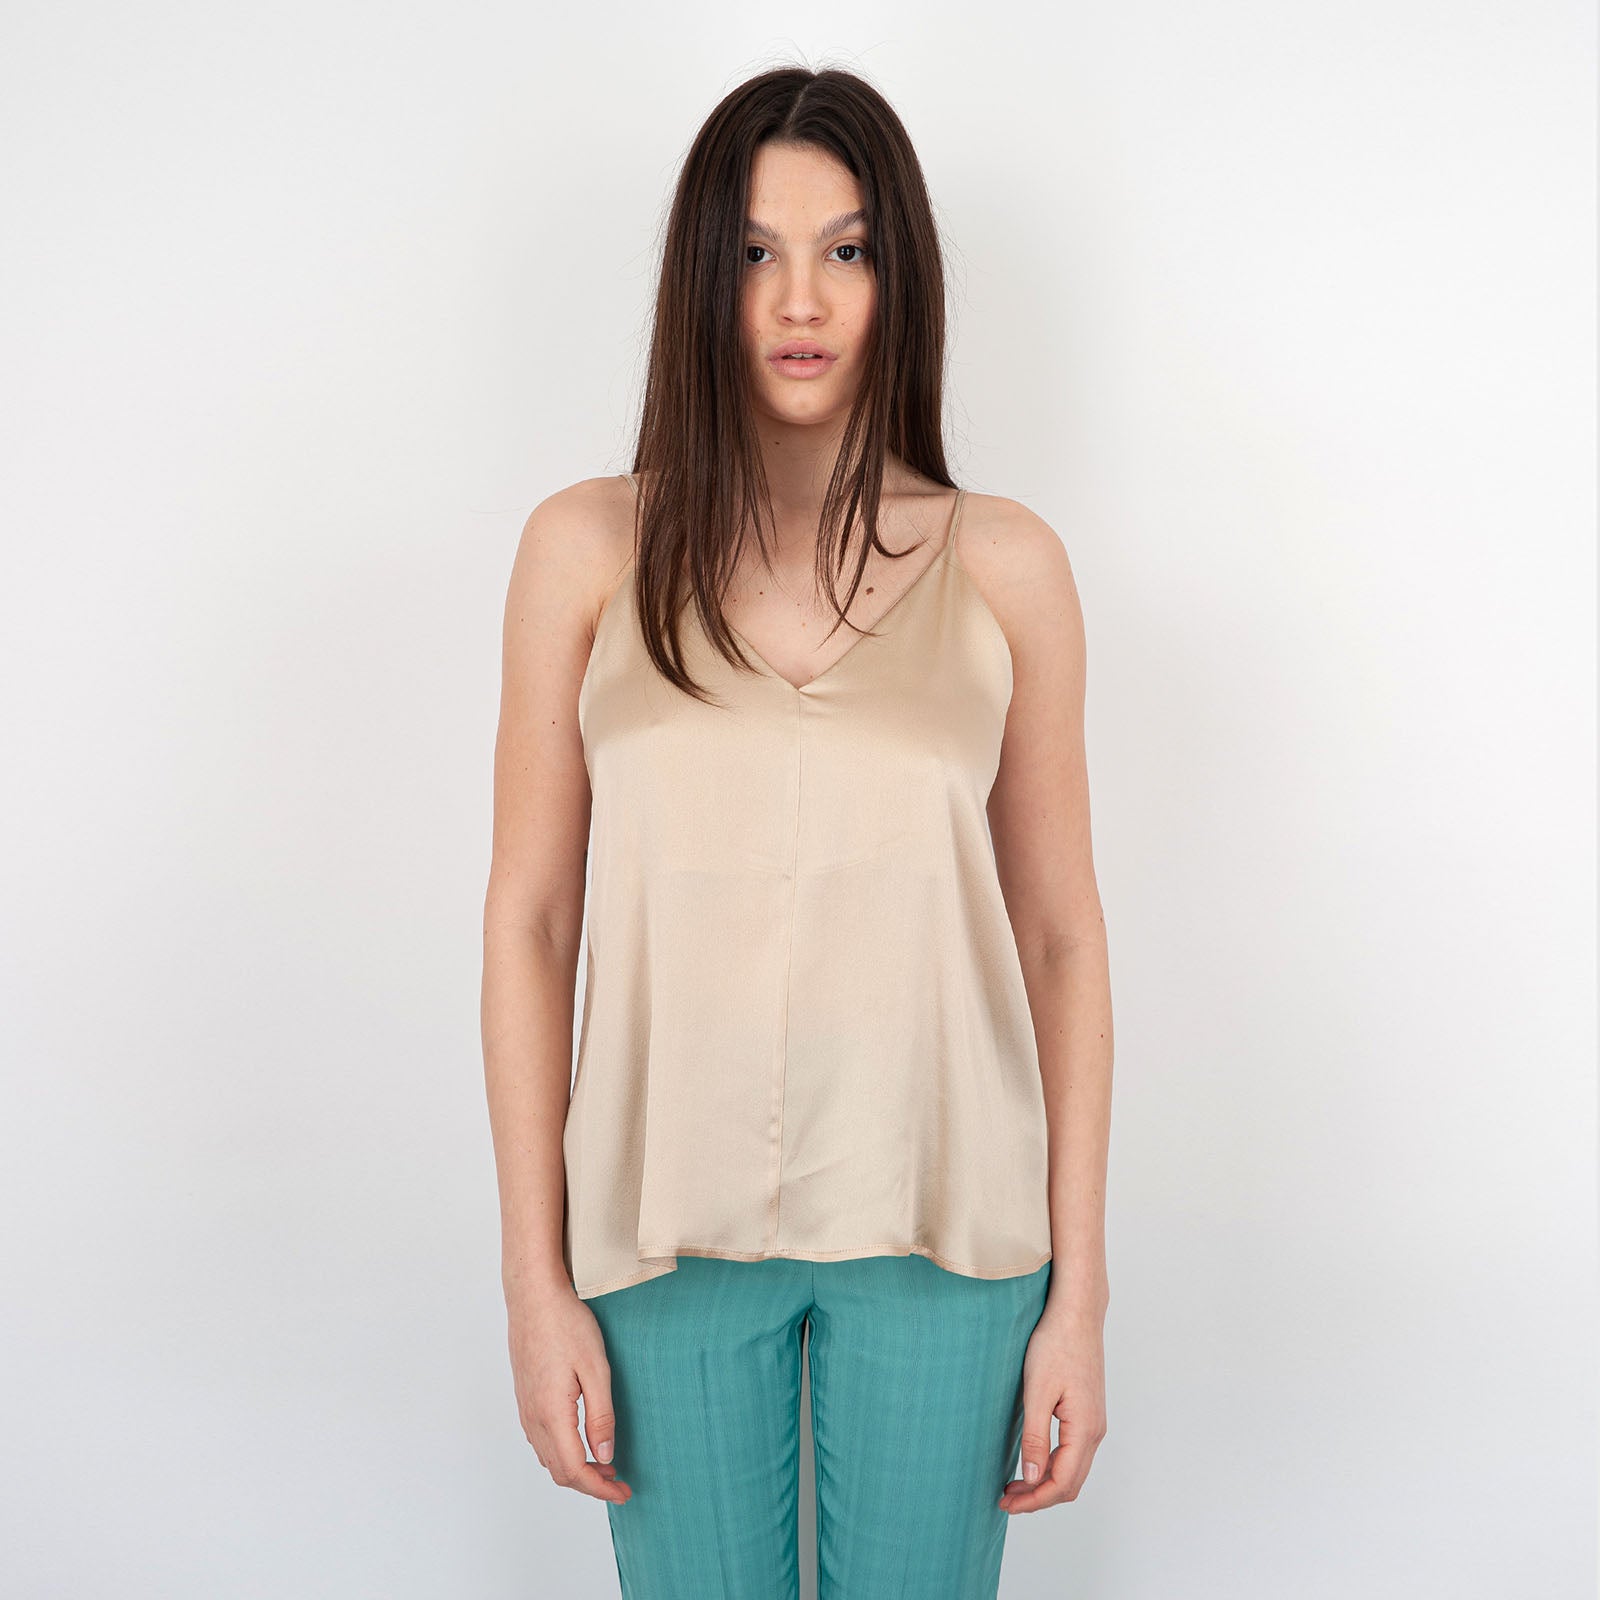 Semicouture Hanna Synthetic Top Camel - 6